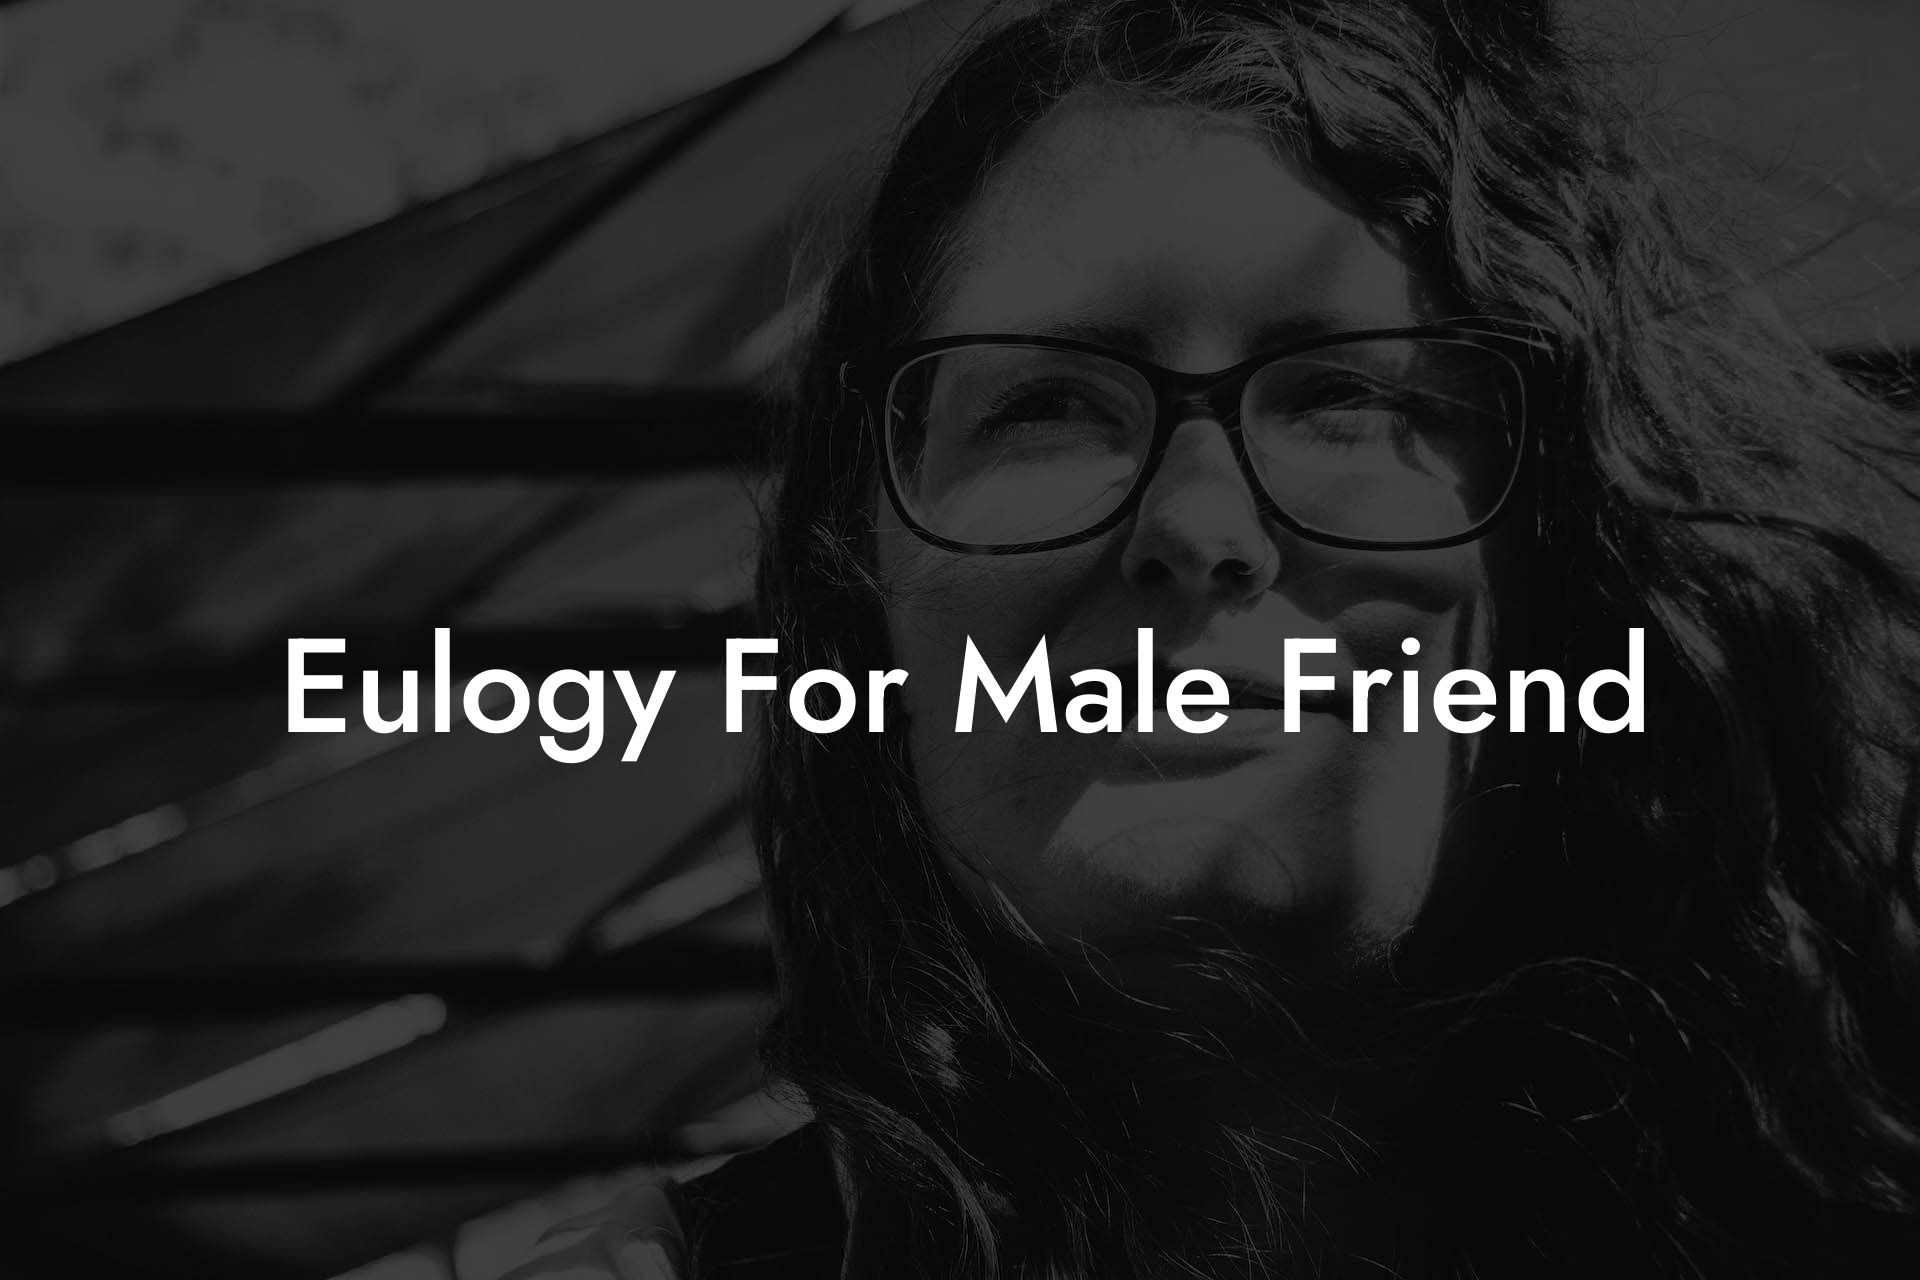 Eulogy For Male Friend